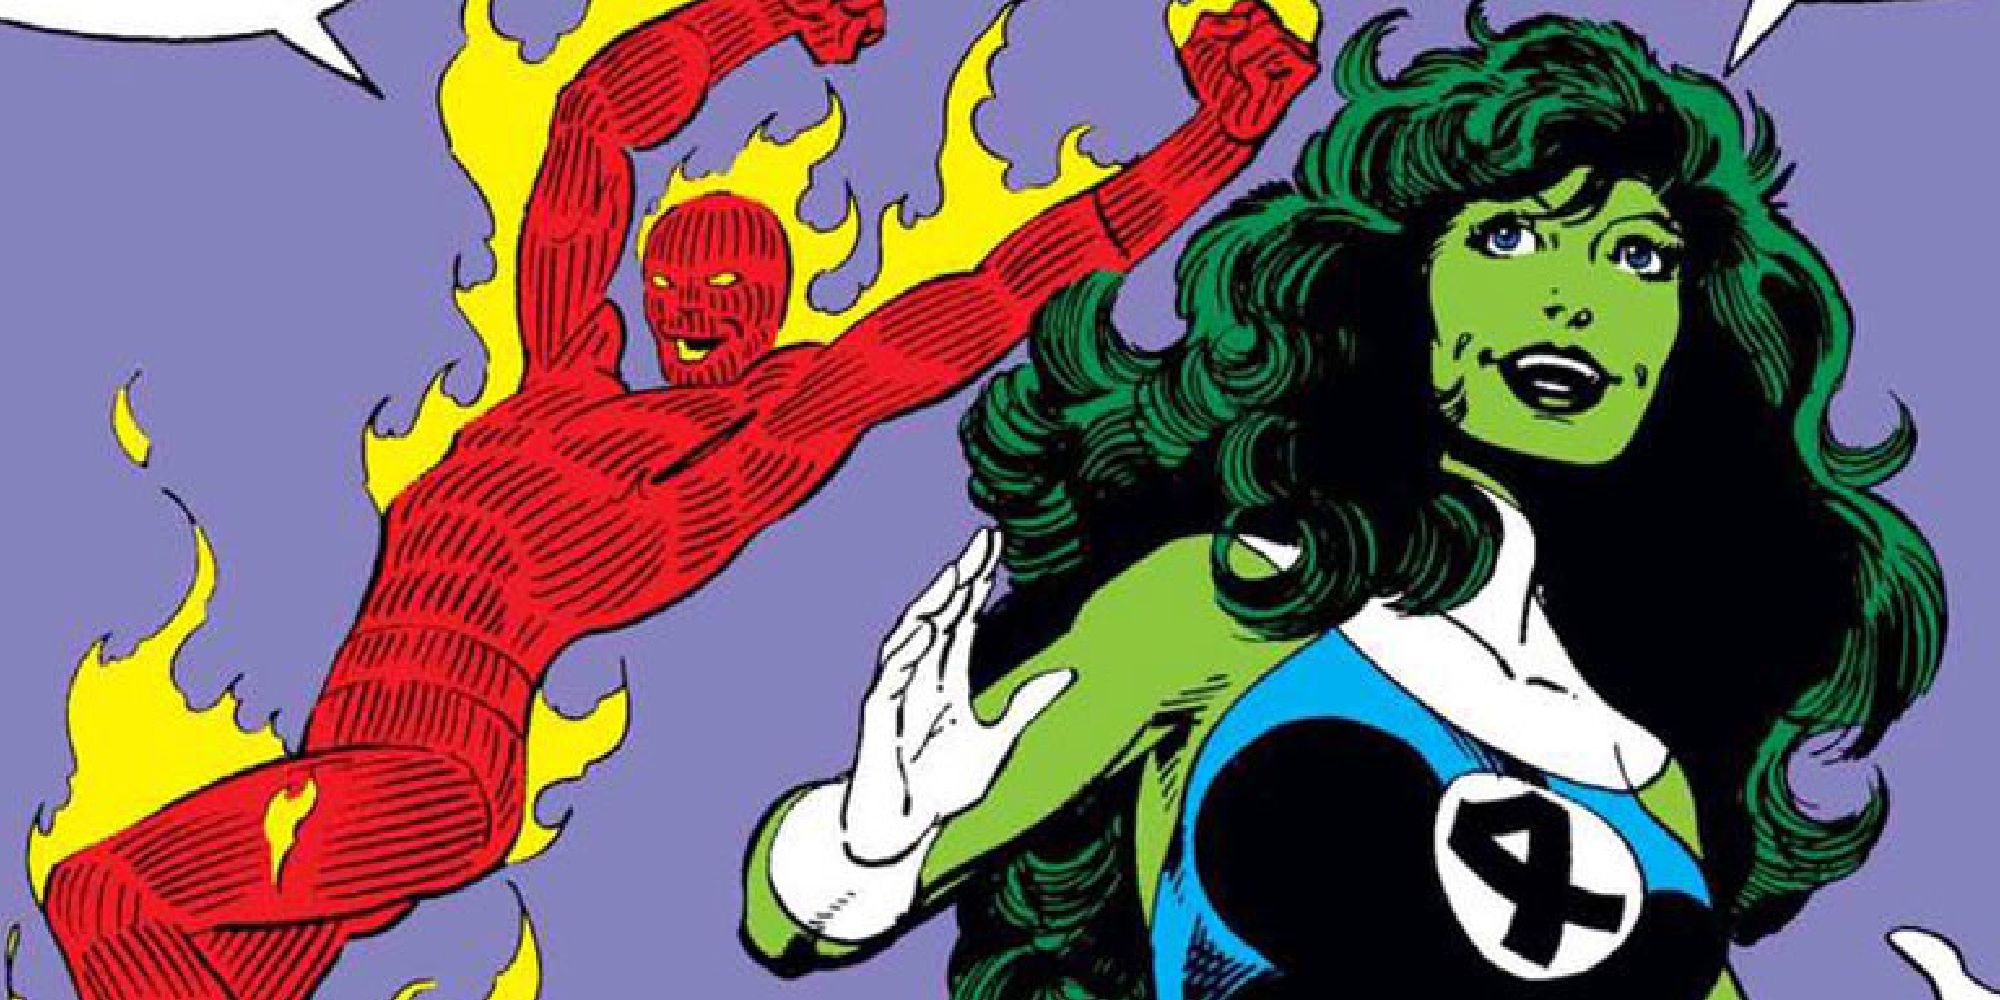 She-Hulk wearing a Fantastic Four outfit with Human Torch